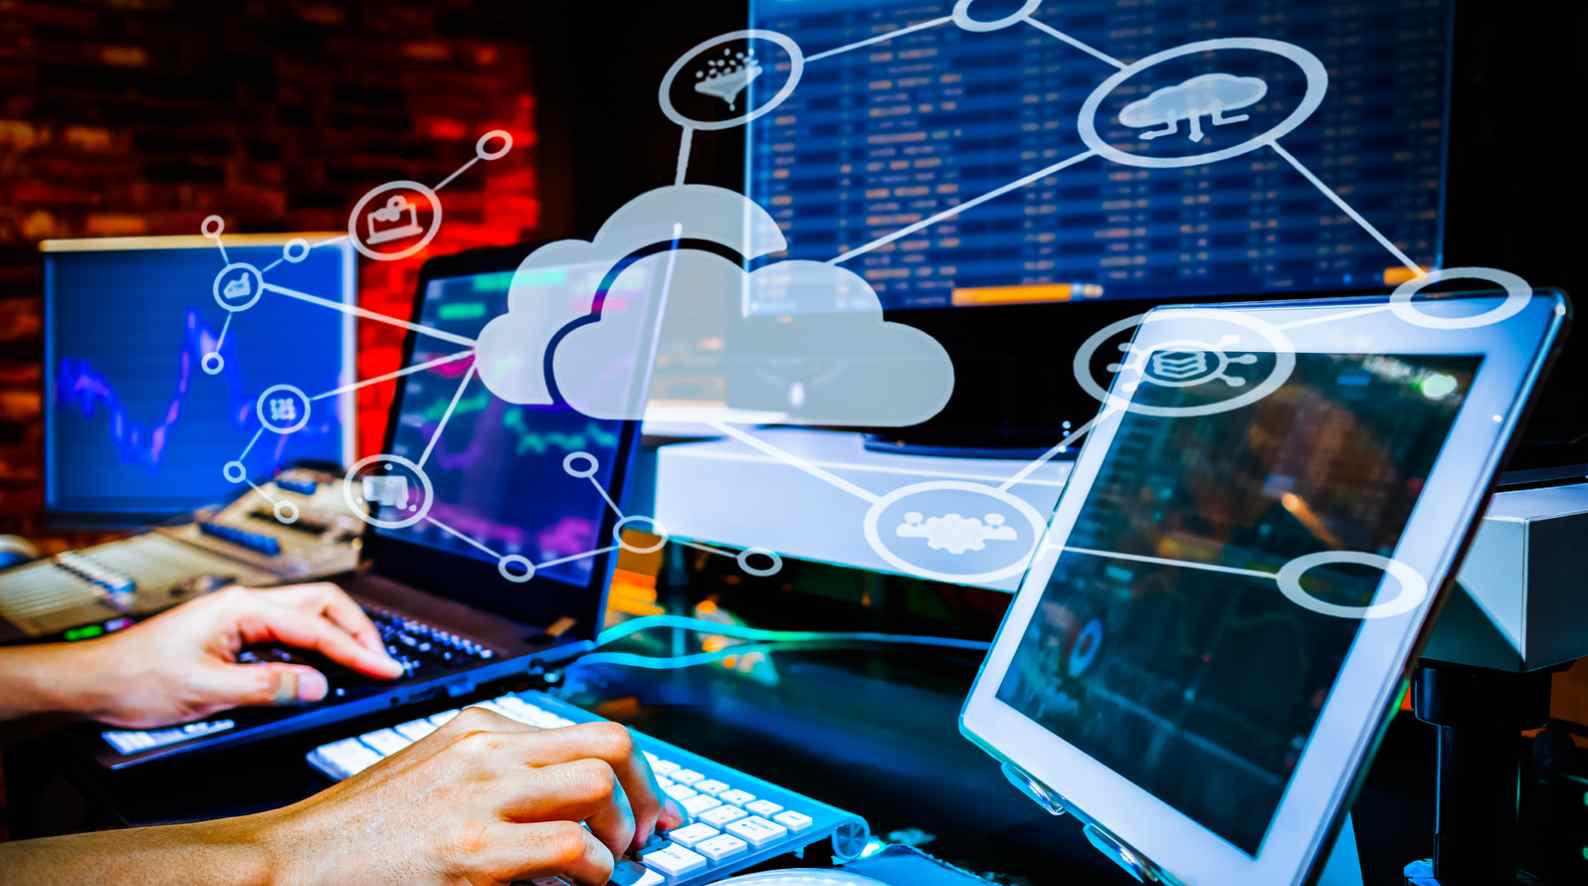 How Cloud Computing Is Changing Management